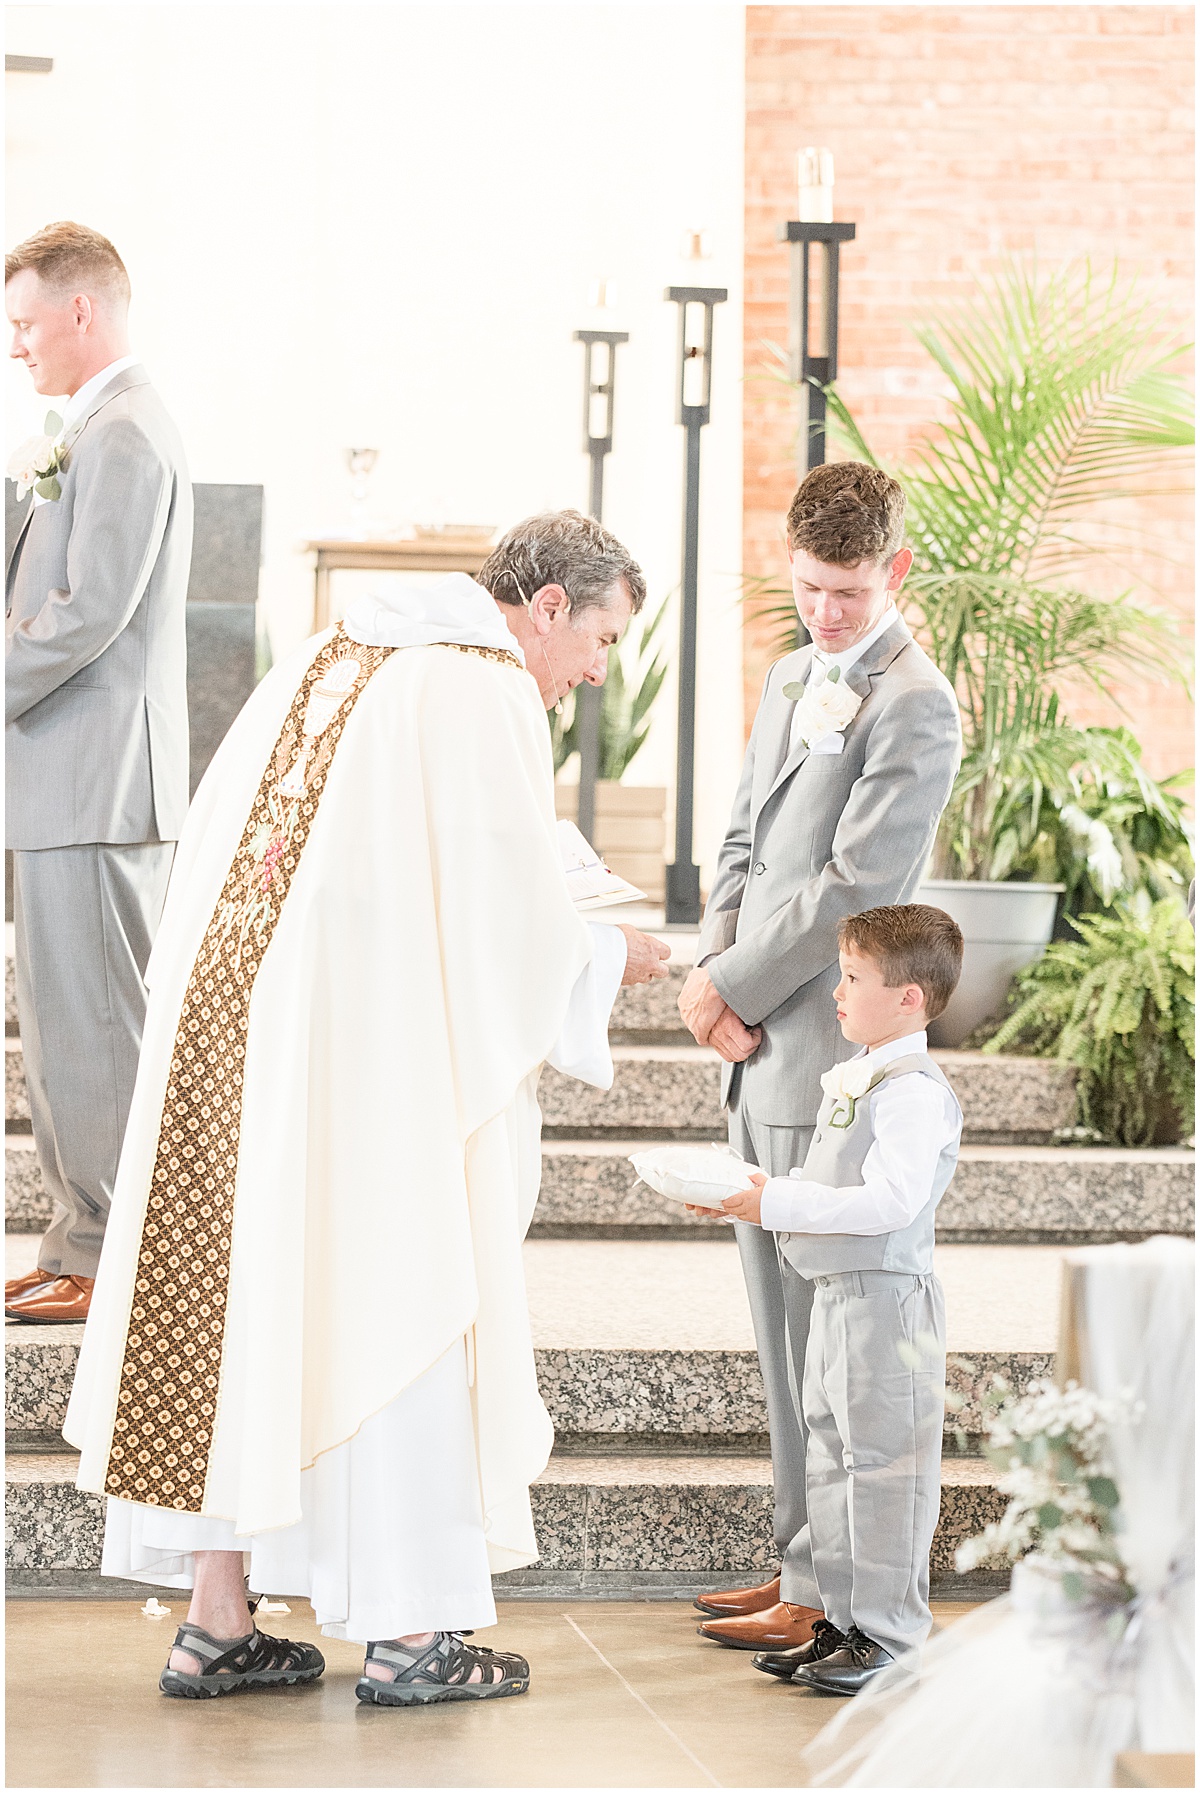 Wedding Ceremony at St. Thomas Aquinas Church in West Lafayette, Indiana